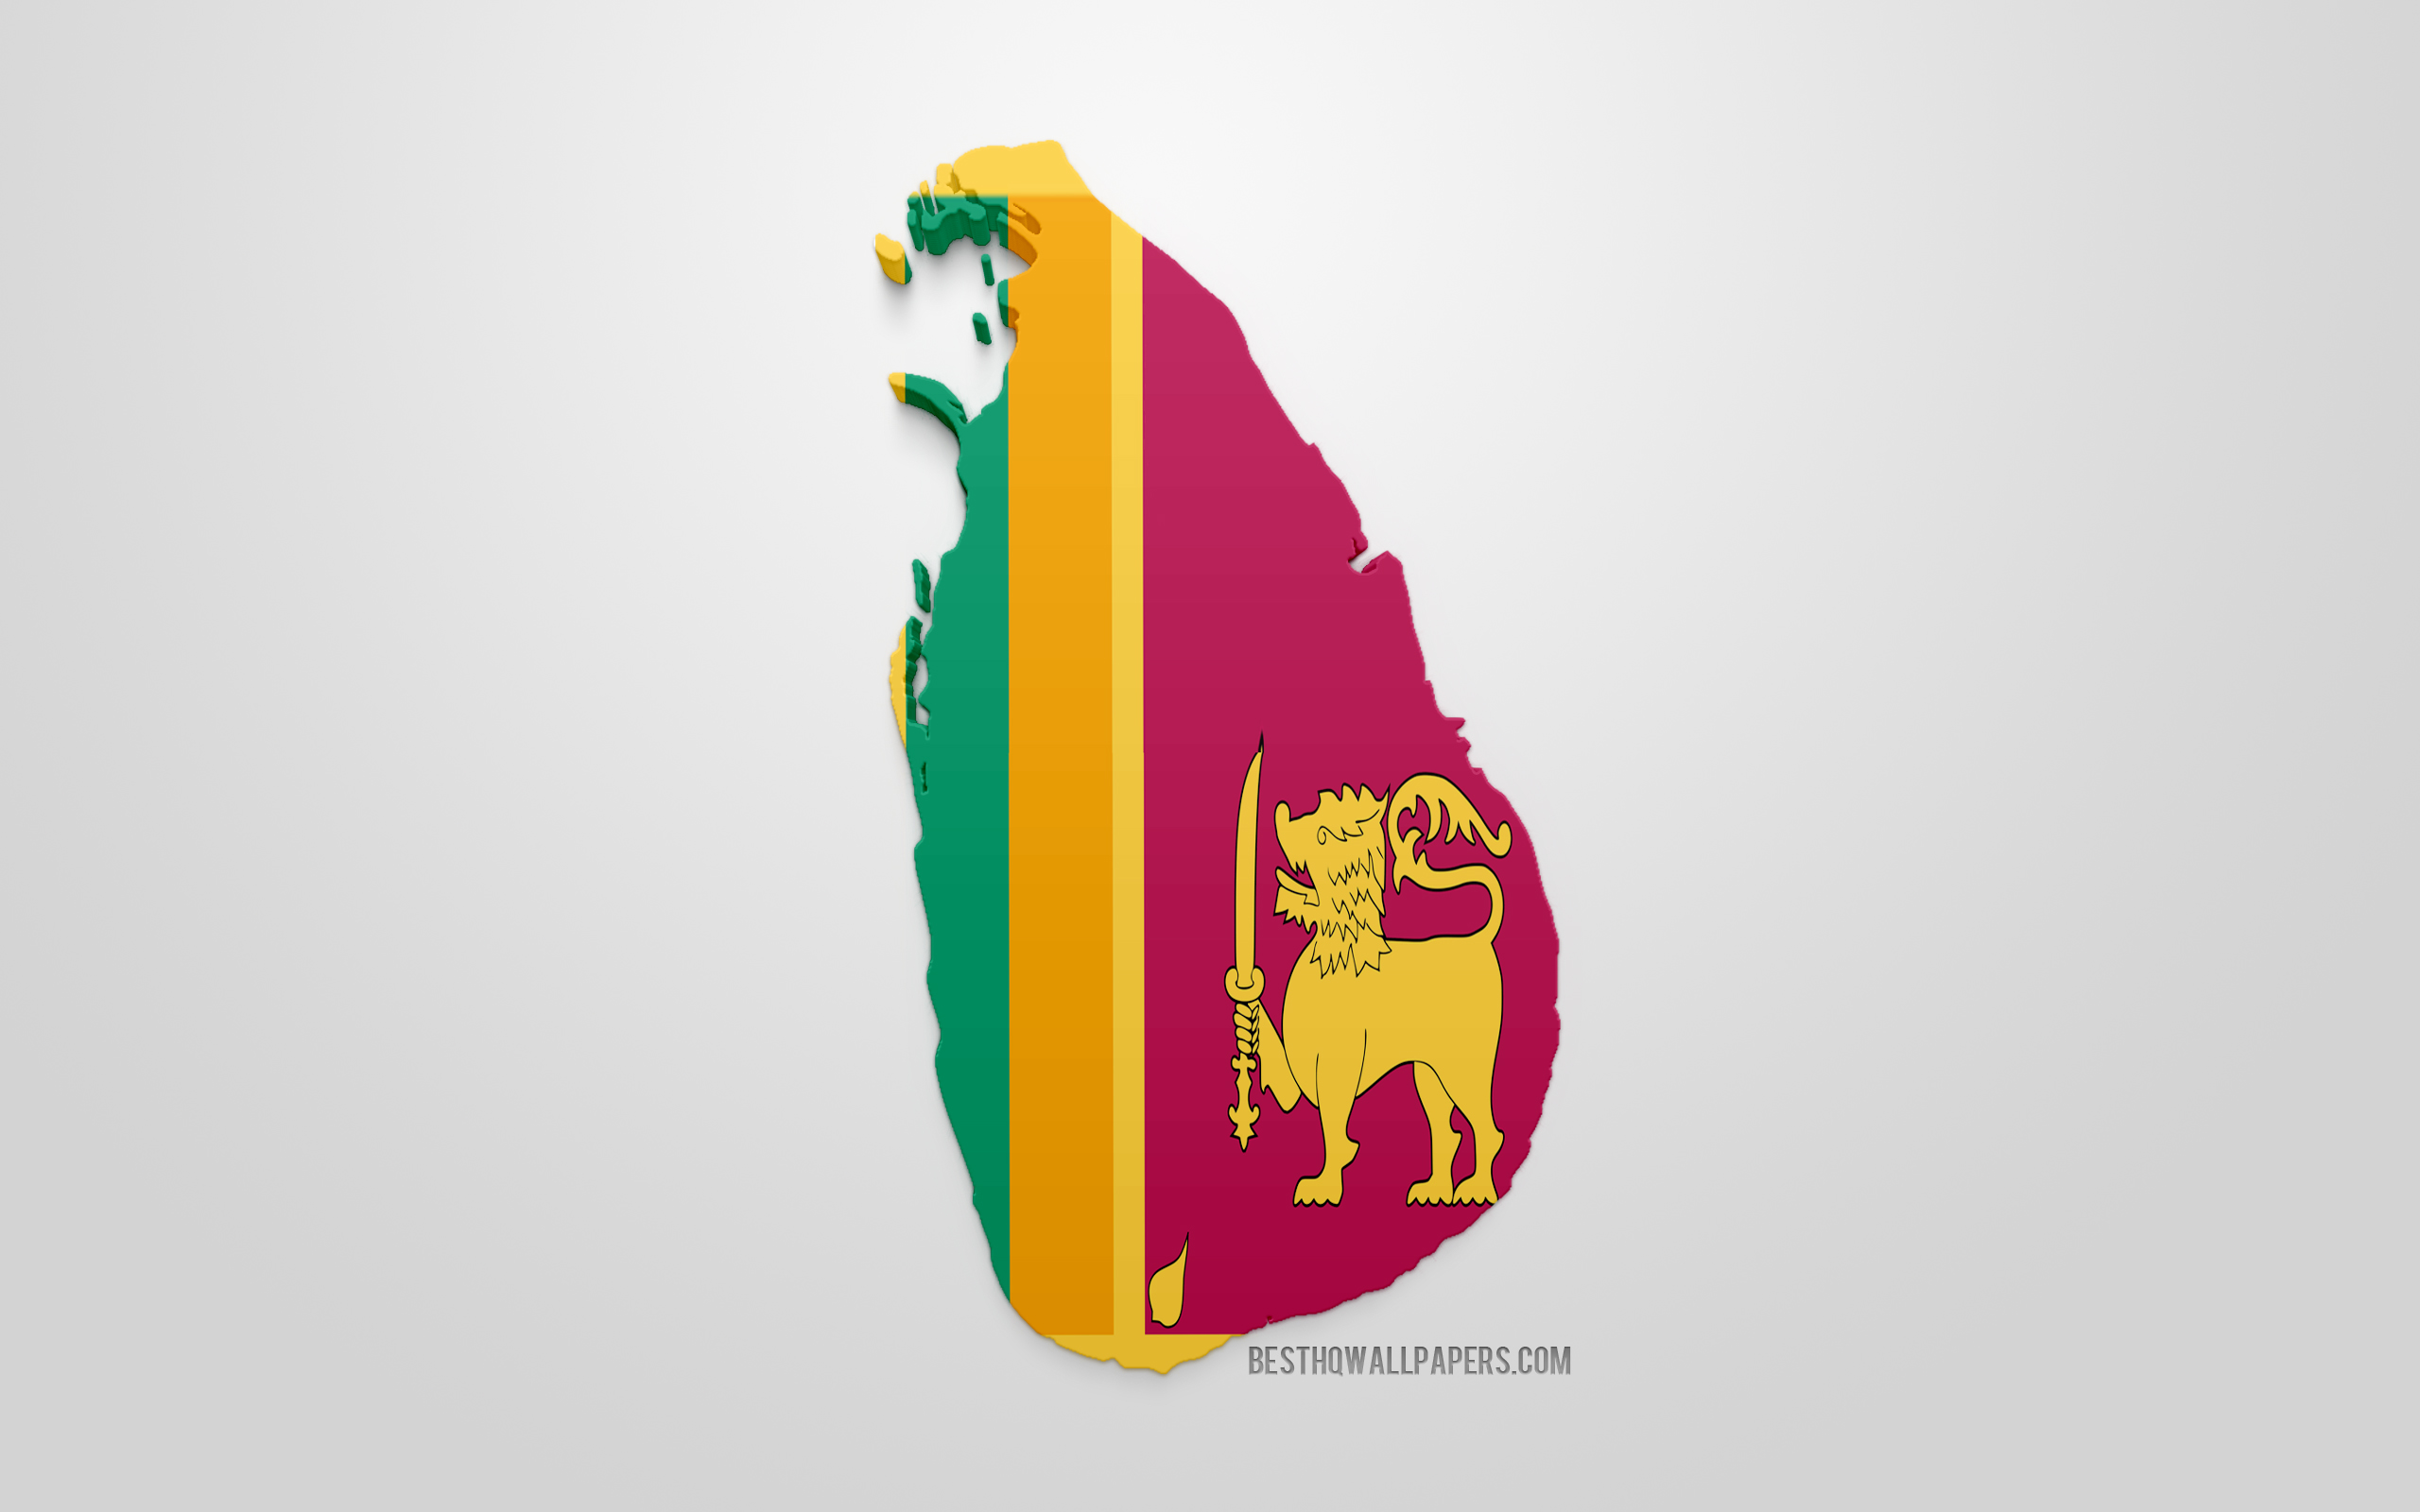 Download wallpaper 3D flag of Sri Lanka, map silhouette of Sri Lanka, 3D art, Sri Lanka flag, Europe, Sri Lanka, geography, Sri Lanka 3D silhouette for desktop with resolution 2560x1600. High Quality